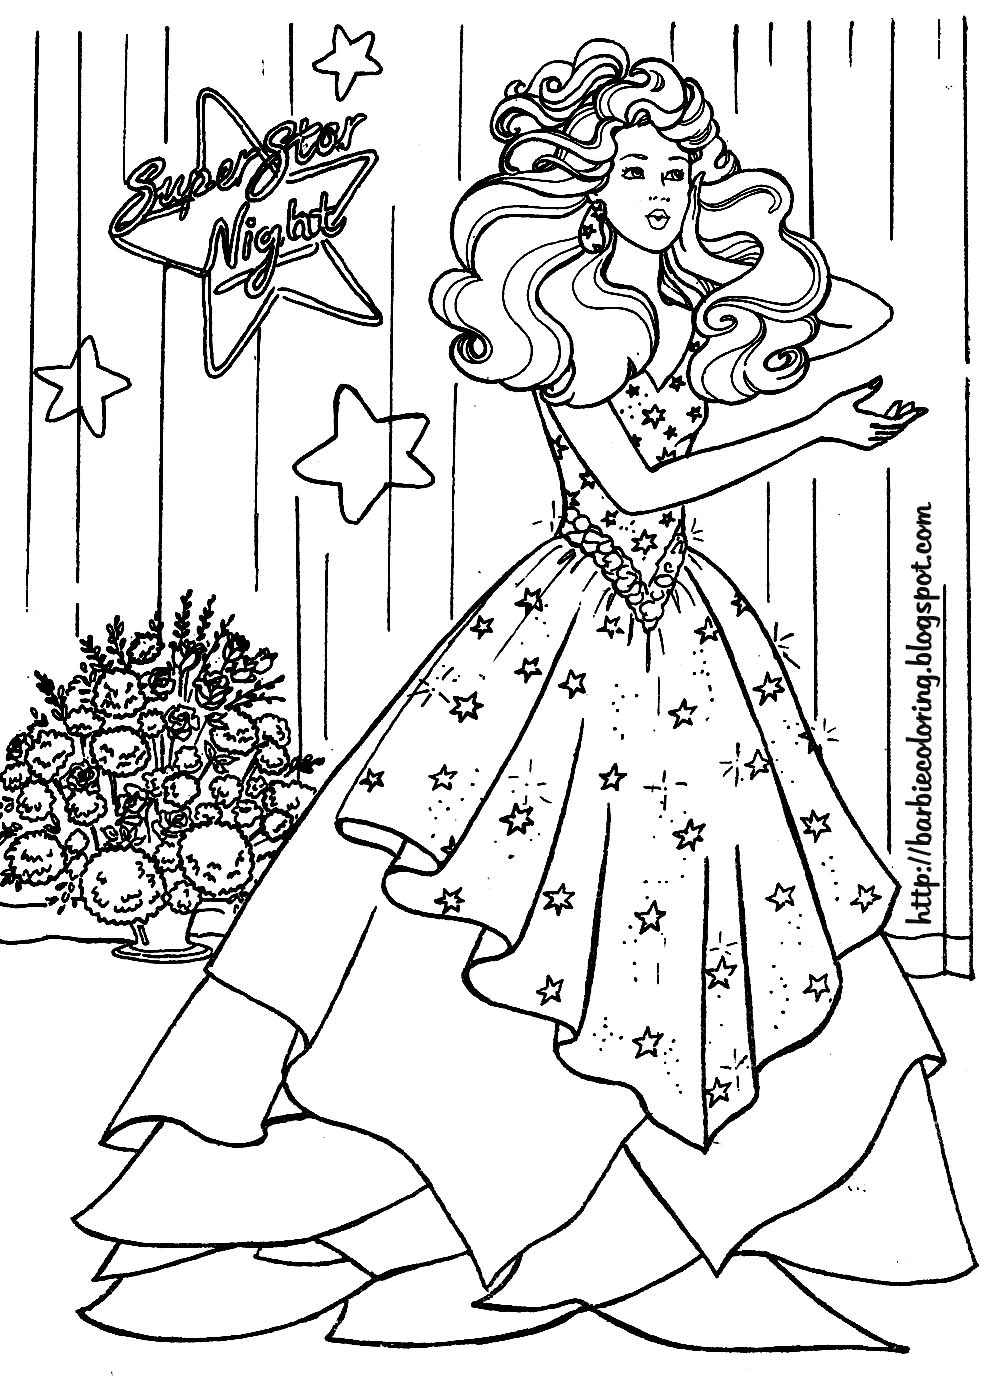 Download Barbie at Theater Coloring Pages | Barbie Coloring ...